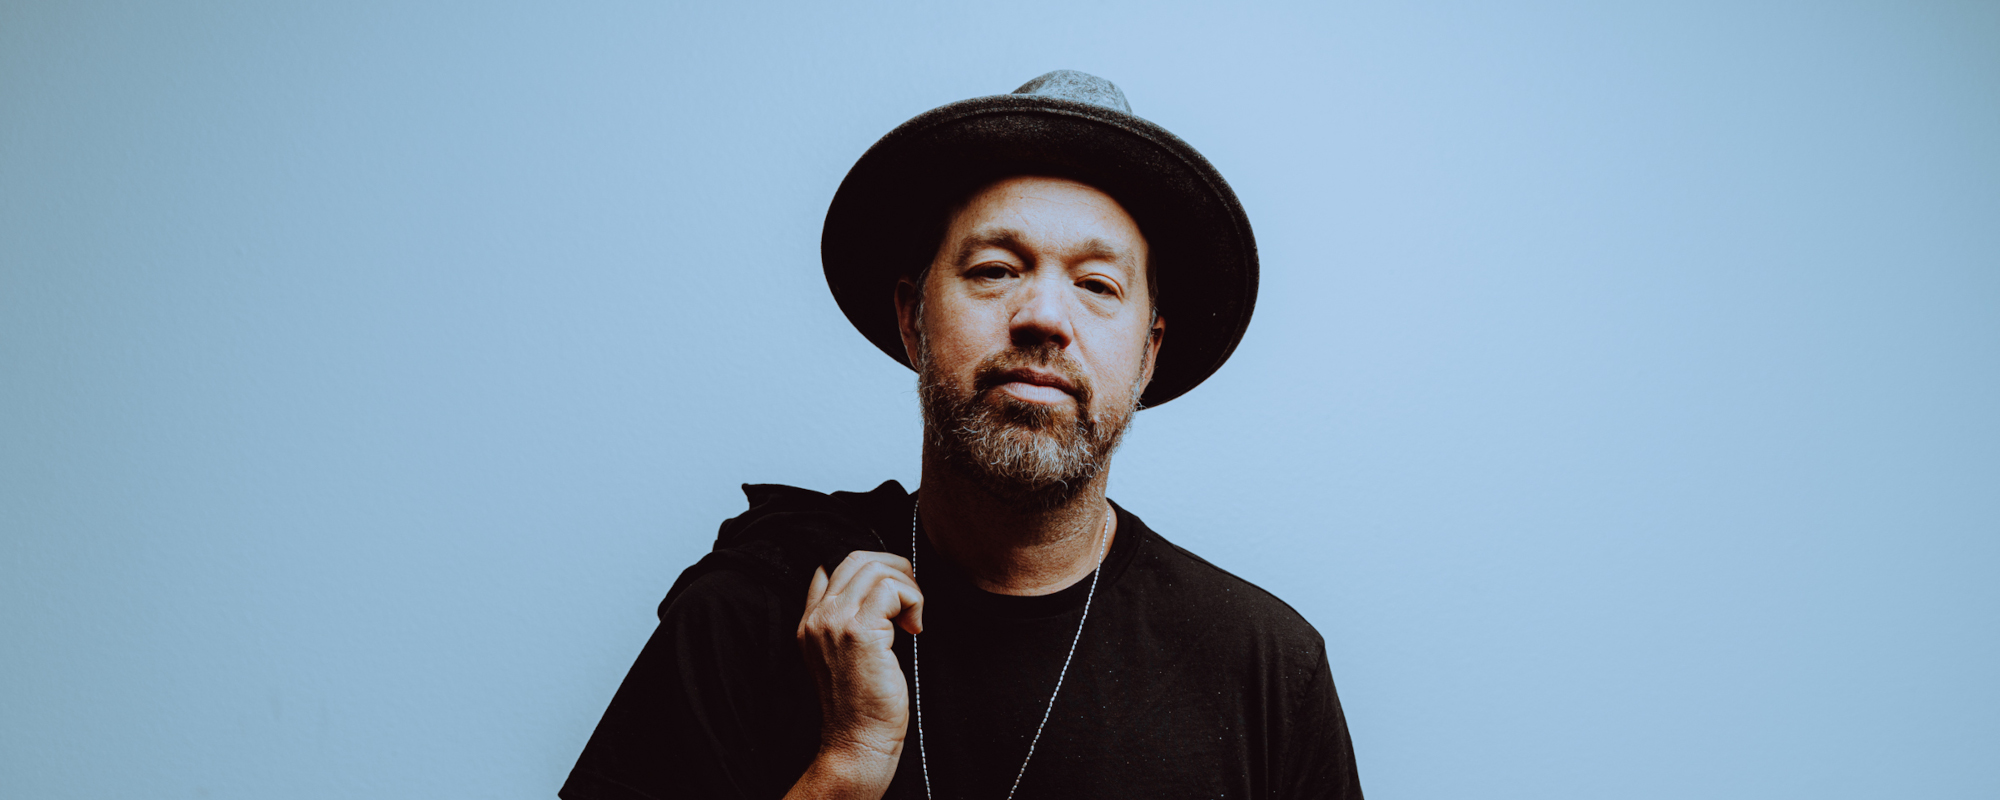 Daily Discovery: Eric Krasno’s “Alone Together” Explores Silver Linings with Cosmic Funk